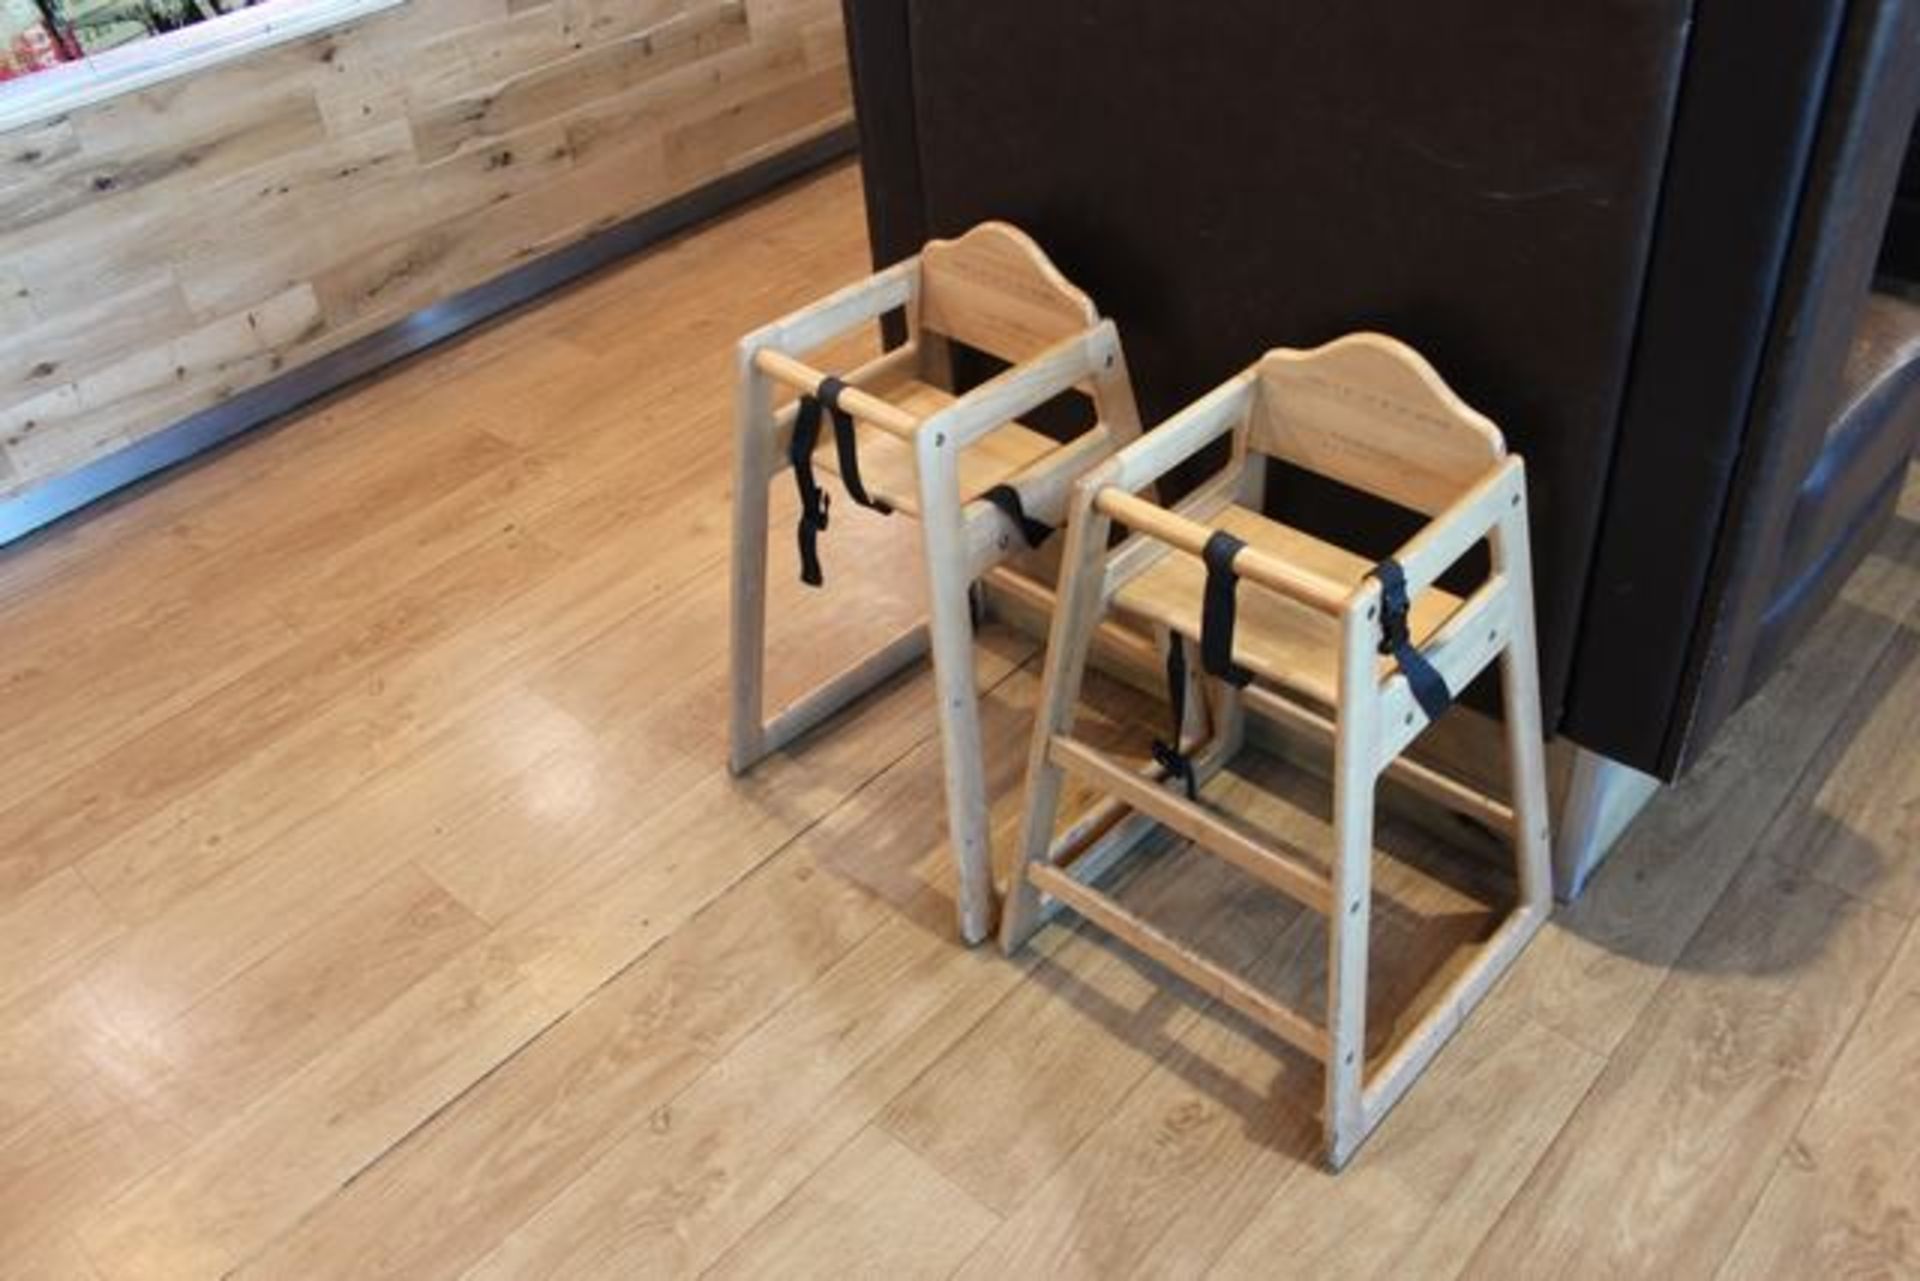 2 x Wooden baby high chair